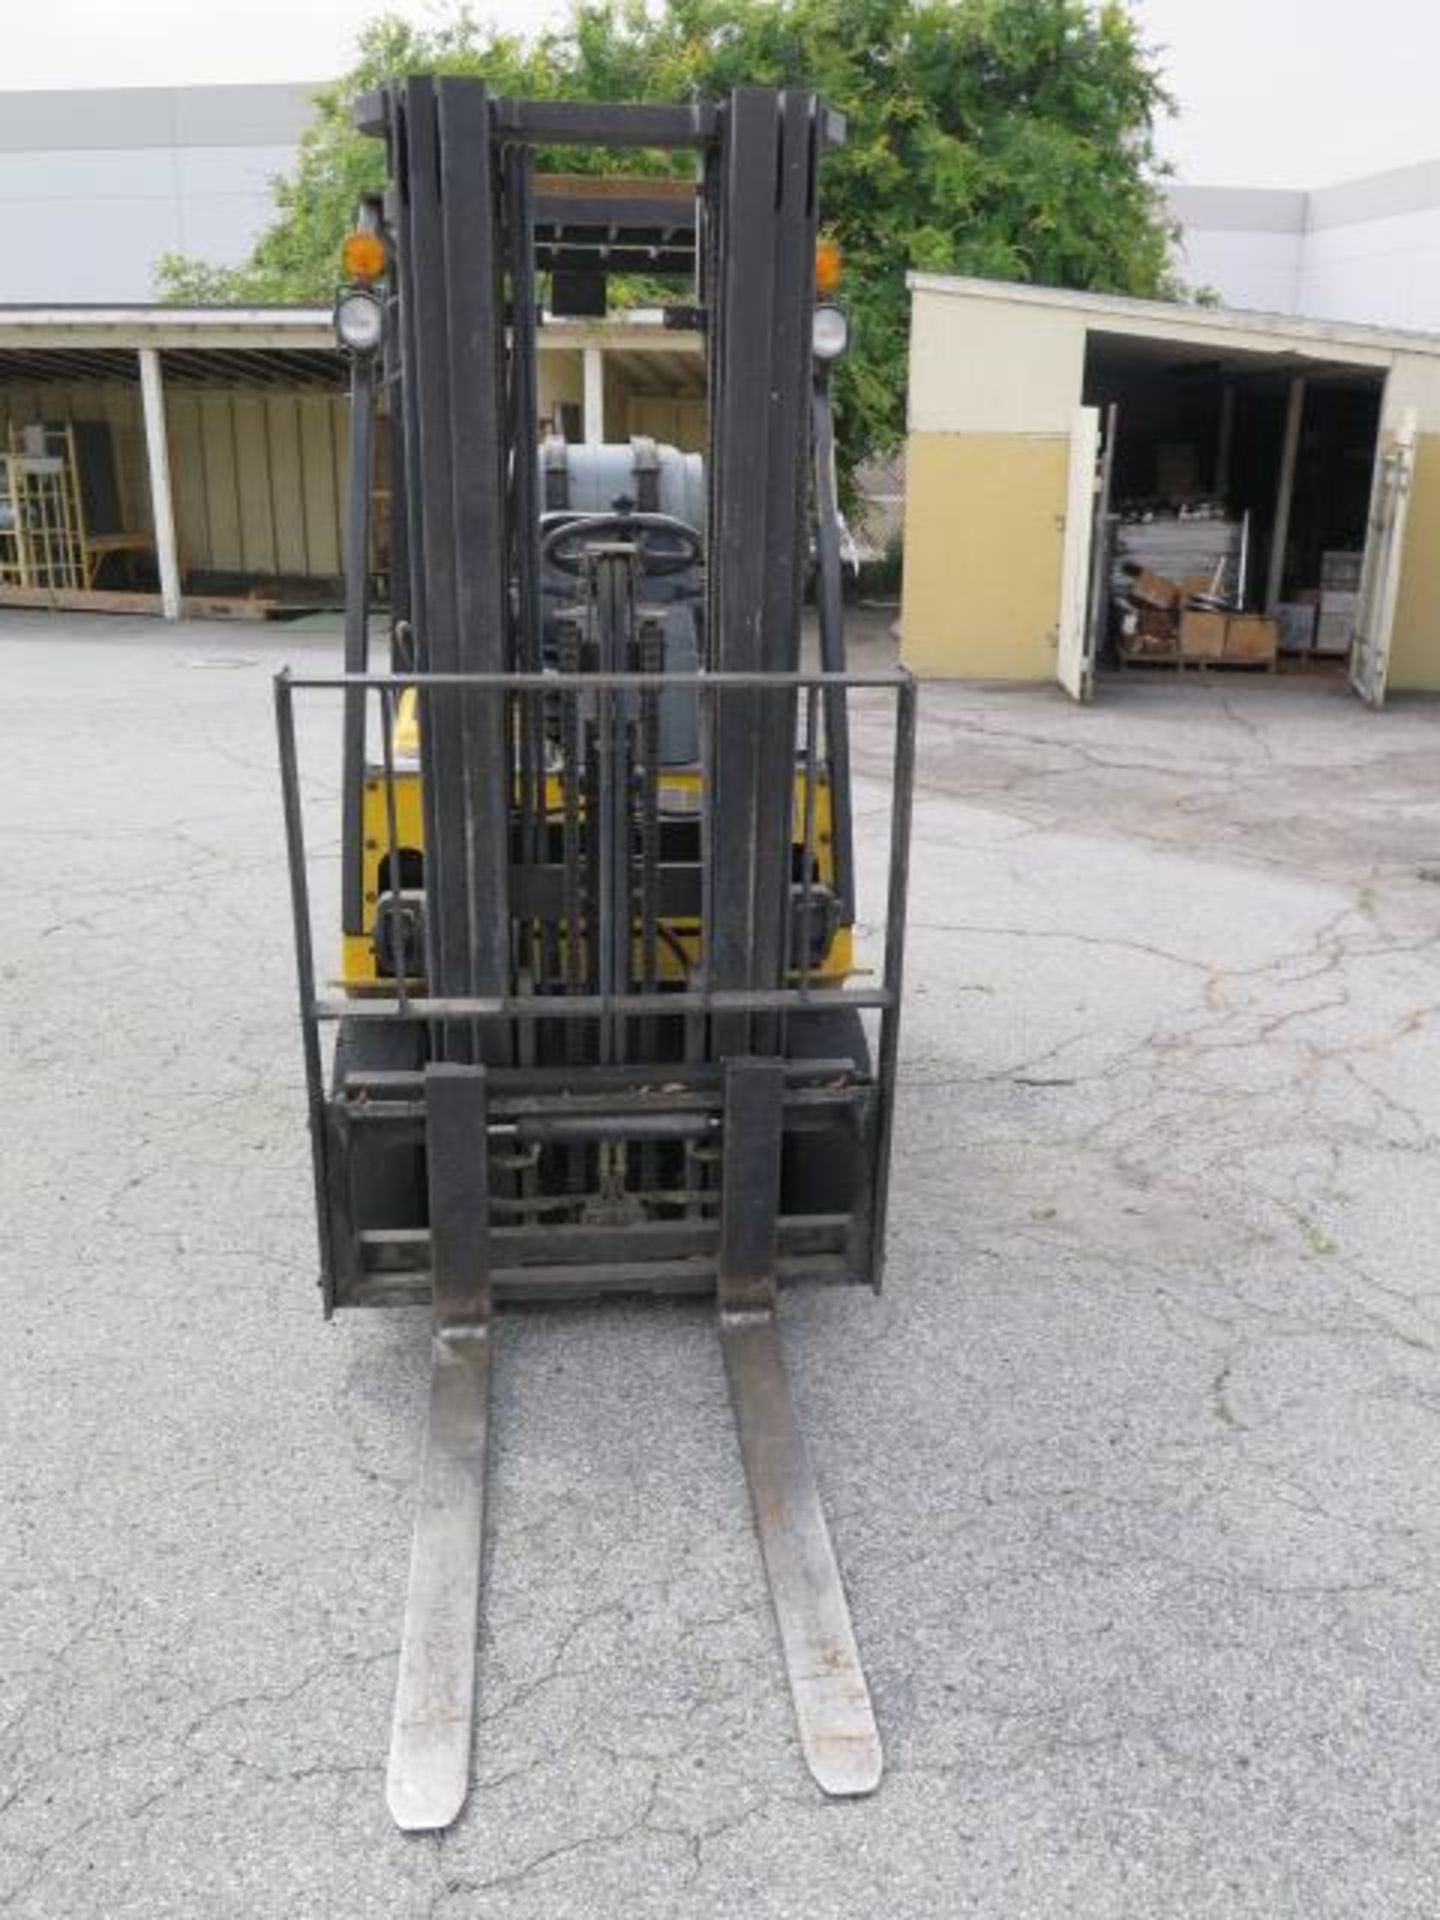 Hyundai 25LC-7 4680 Lb LPG Forklift s/n HC0210054 w/ 3-Stage, 185” Lift, Side Shift, SOLD AS IS - Bild 4 aus 19